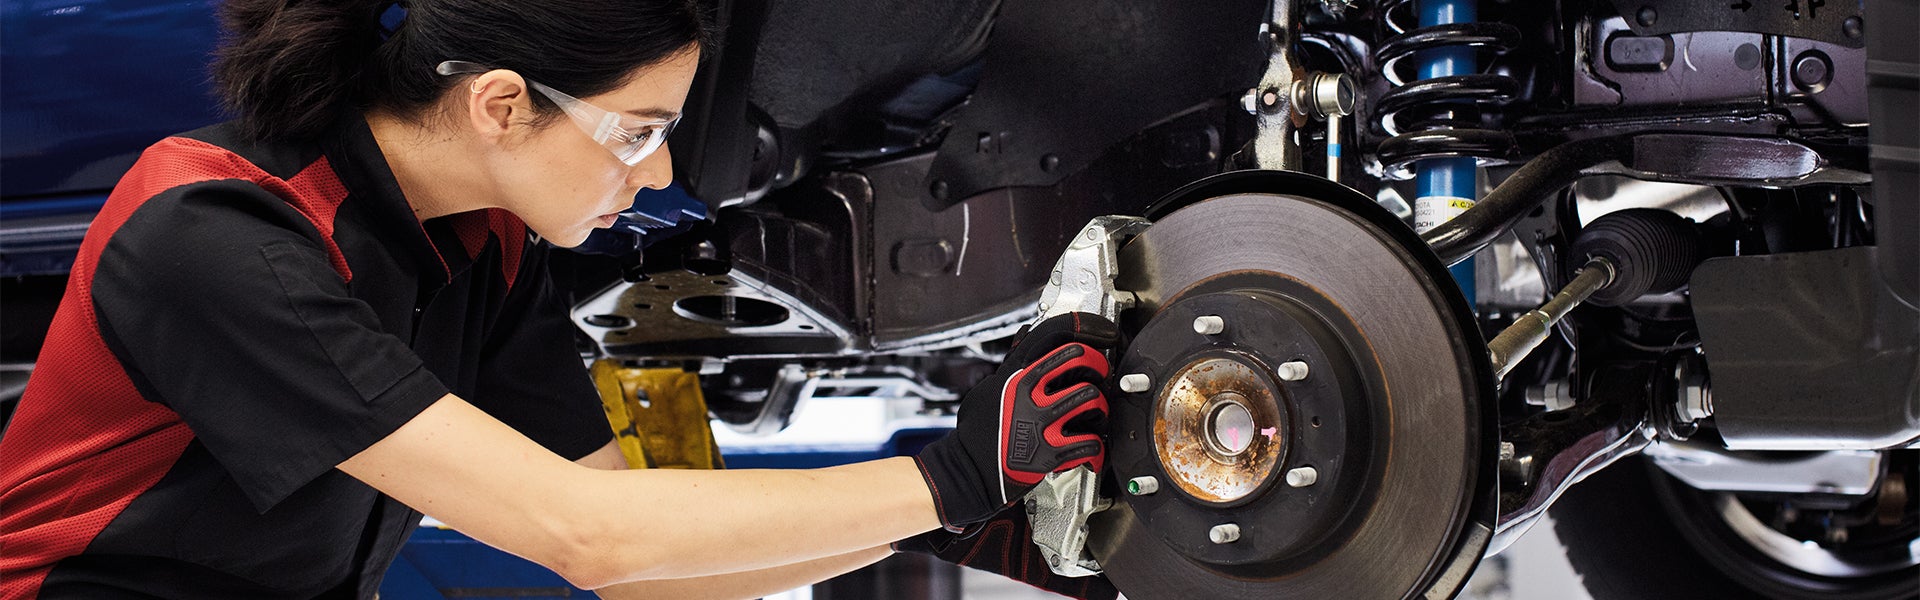 Bennett Toyota of Allentown is a Car Dealership near Coopersburg, PA | Toyota Mechanic replacing brakes on a Tacoma